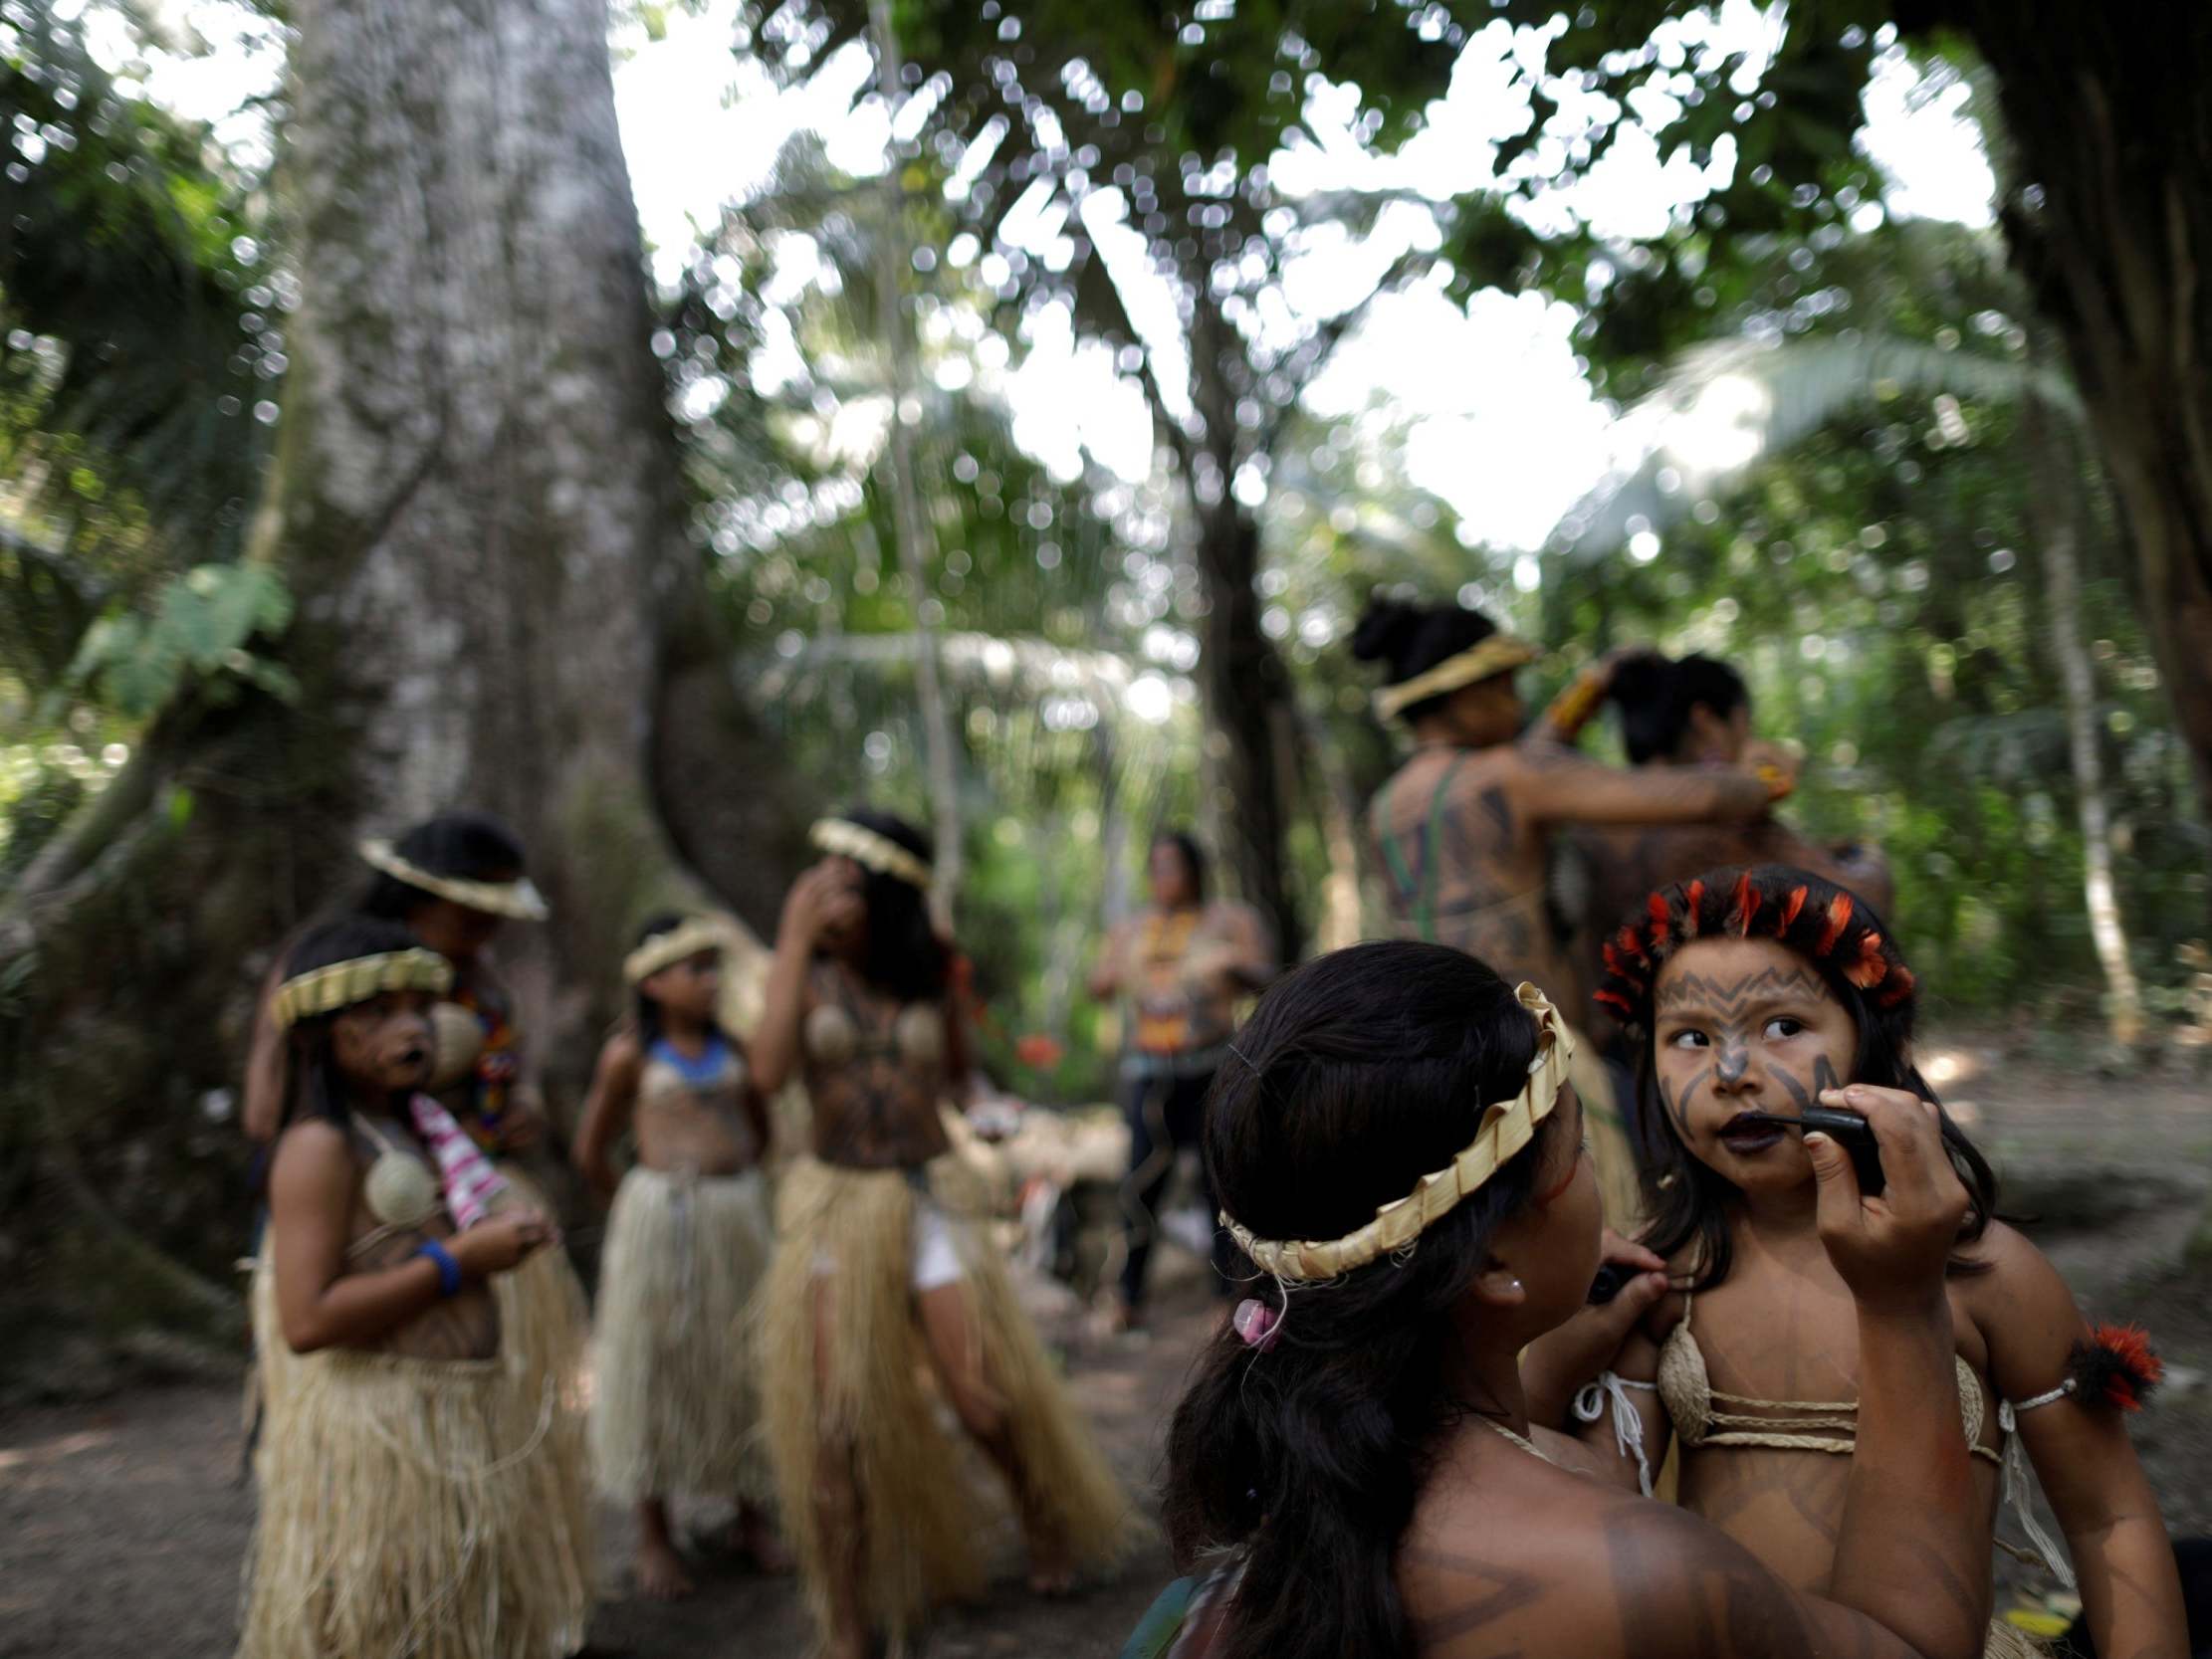 For many tribes in the Amazon, fire is part of their livelihood and